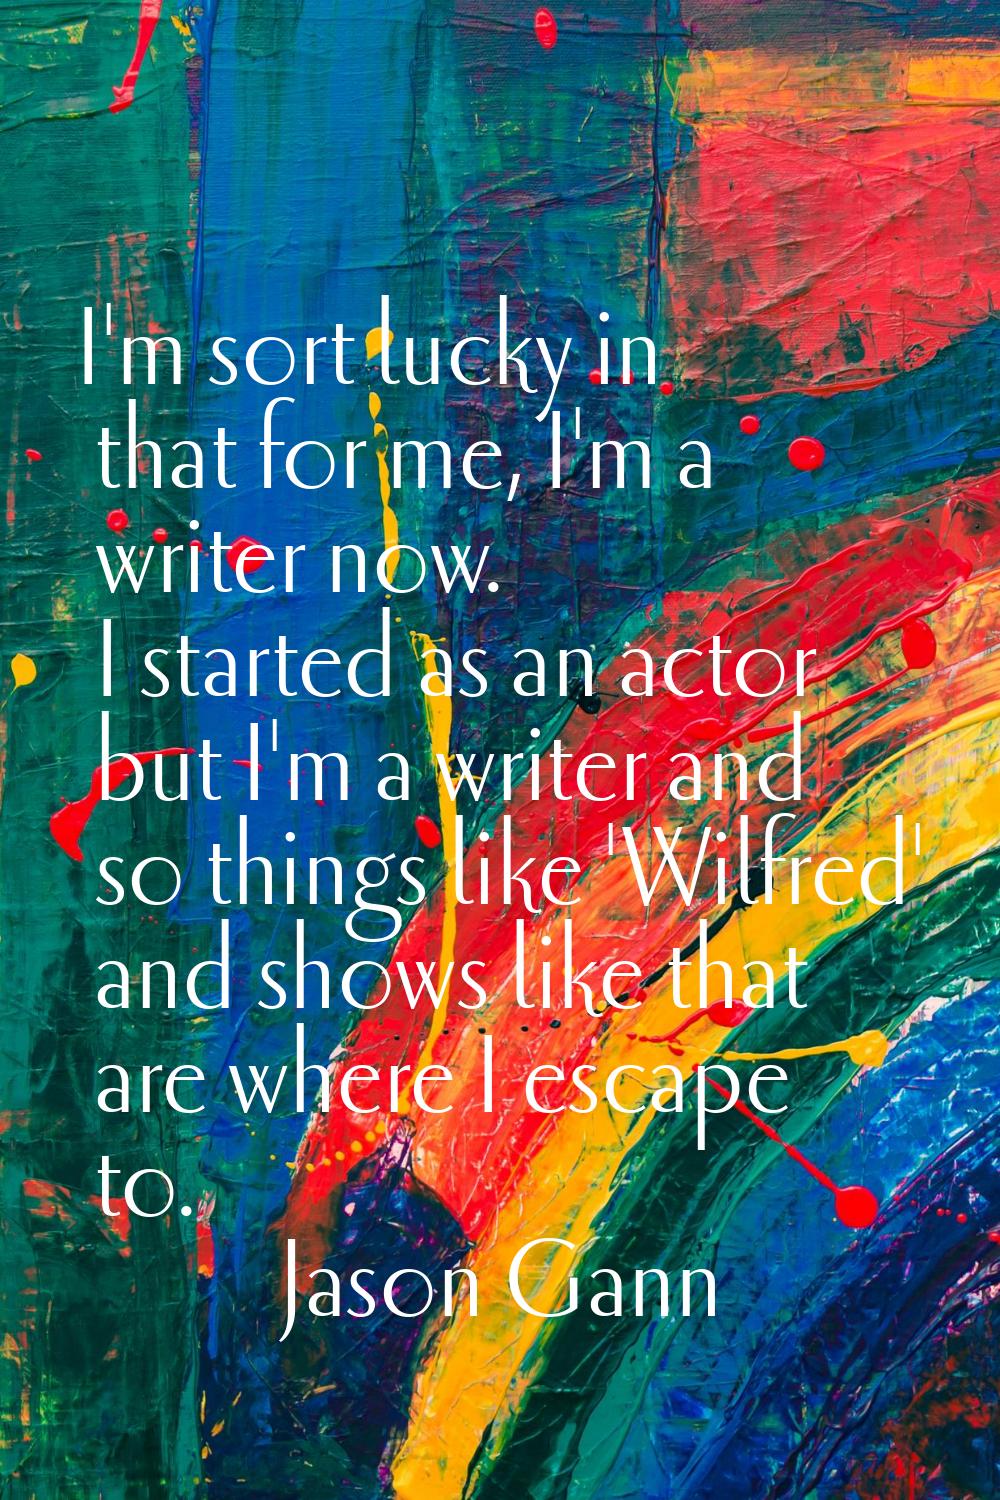 I'm sort lucky in that for me, I'm a writer now. I started as an actor but I'm a writer and so thin